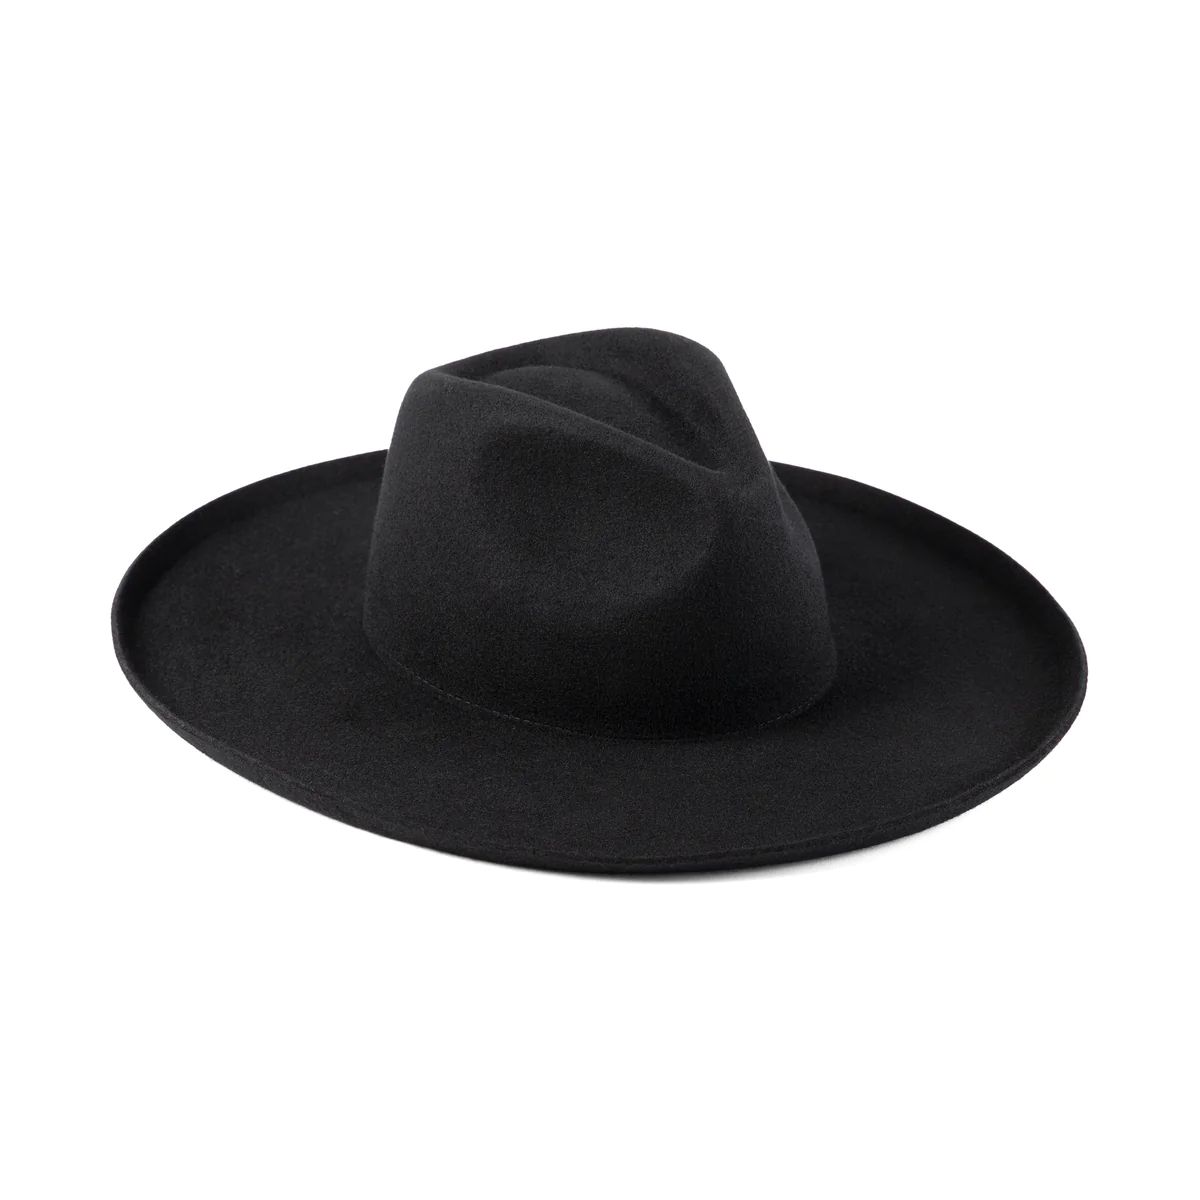 The Melodic Fedora - Black | Lack of Color